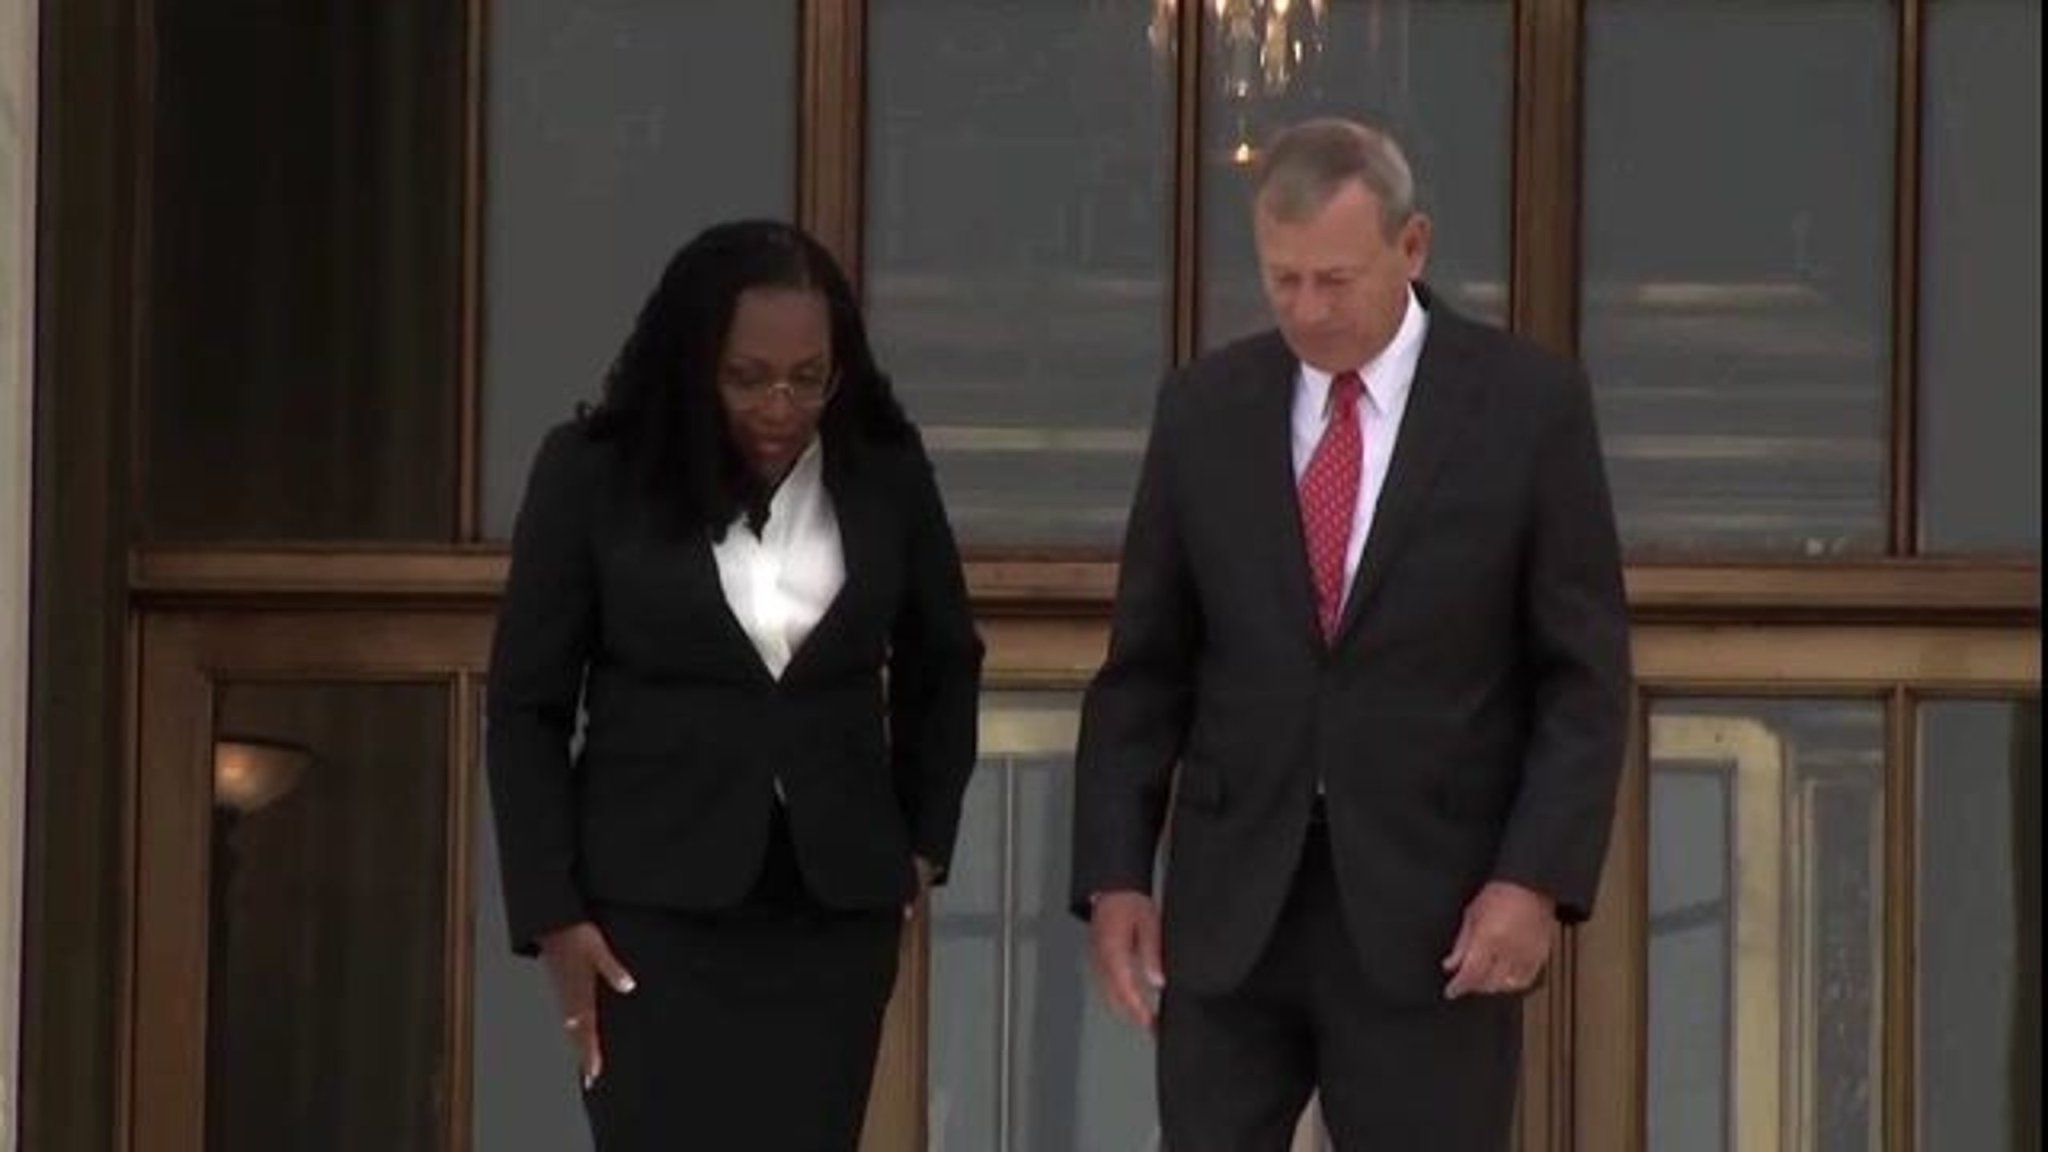 Chief Justice Roberts and Justice Brown Jackson walk down the steps of the Supreme Court after her investiture ceremony.